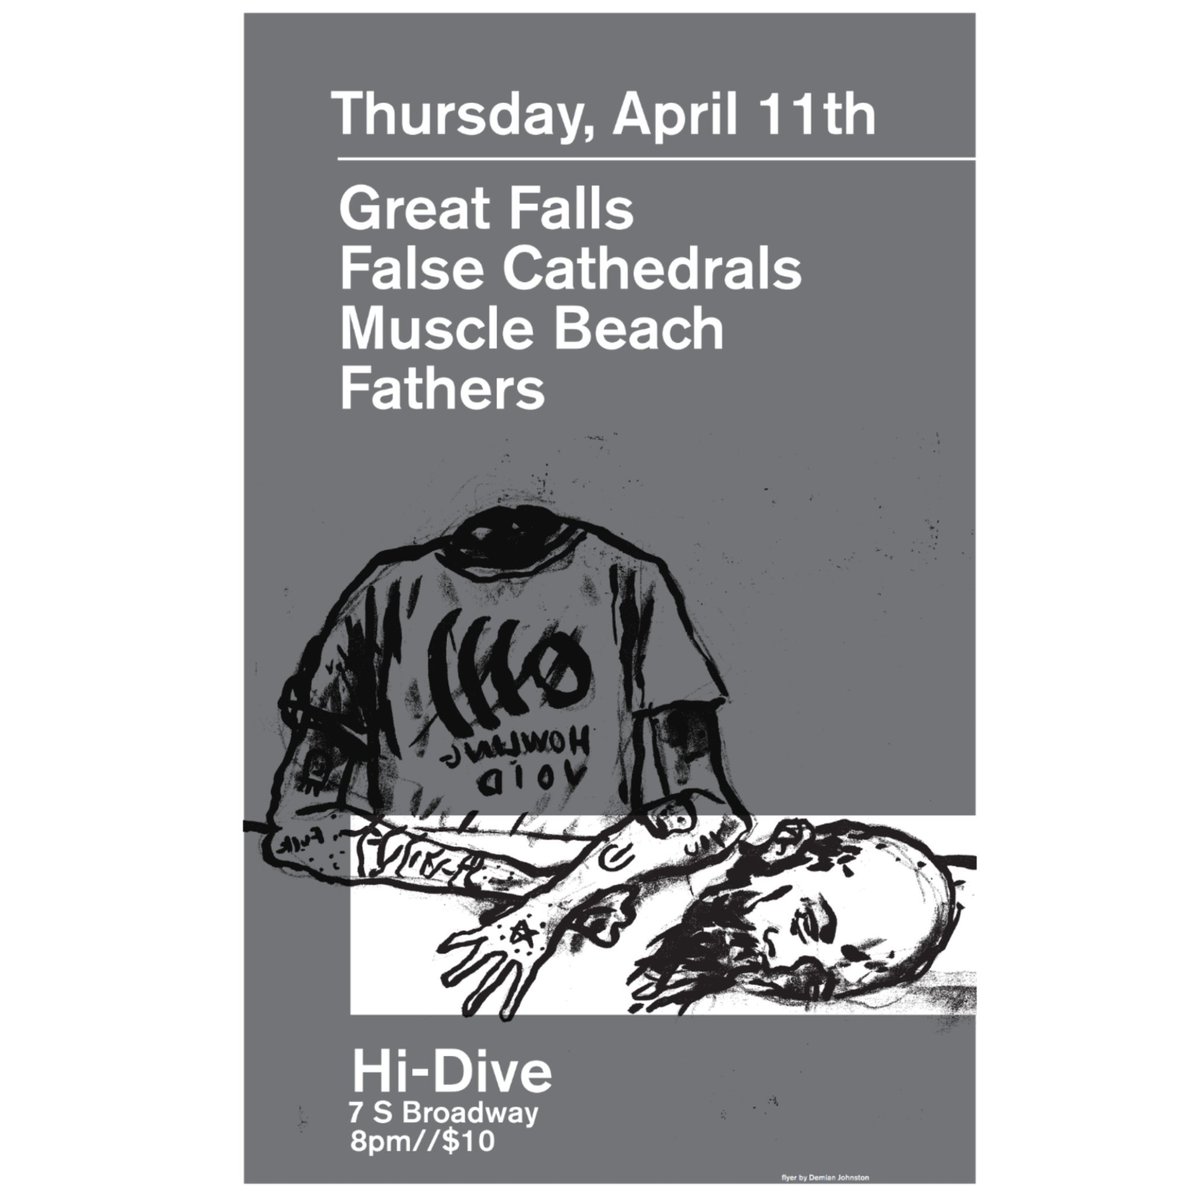 Then tomorrow we lay it down again at the @hidivedenver  with @greatfallsnoise and #falsecathedrals, where I get to play with Muscle Beach AND my brothers in @fathersbandco! #comegetkilled   #denverisheavier #sailorrecords #bangover #lowendtheory